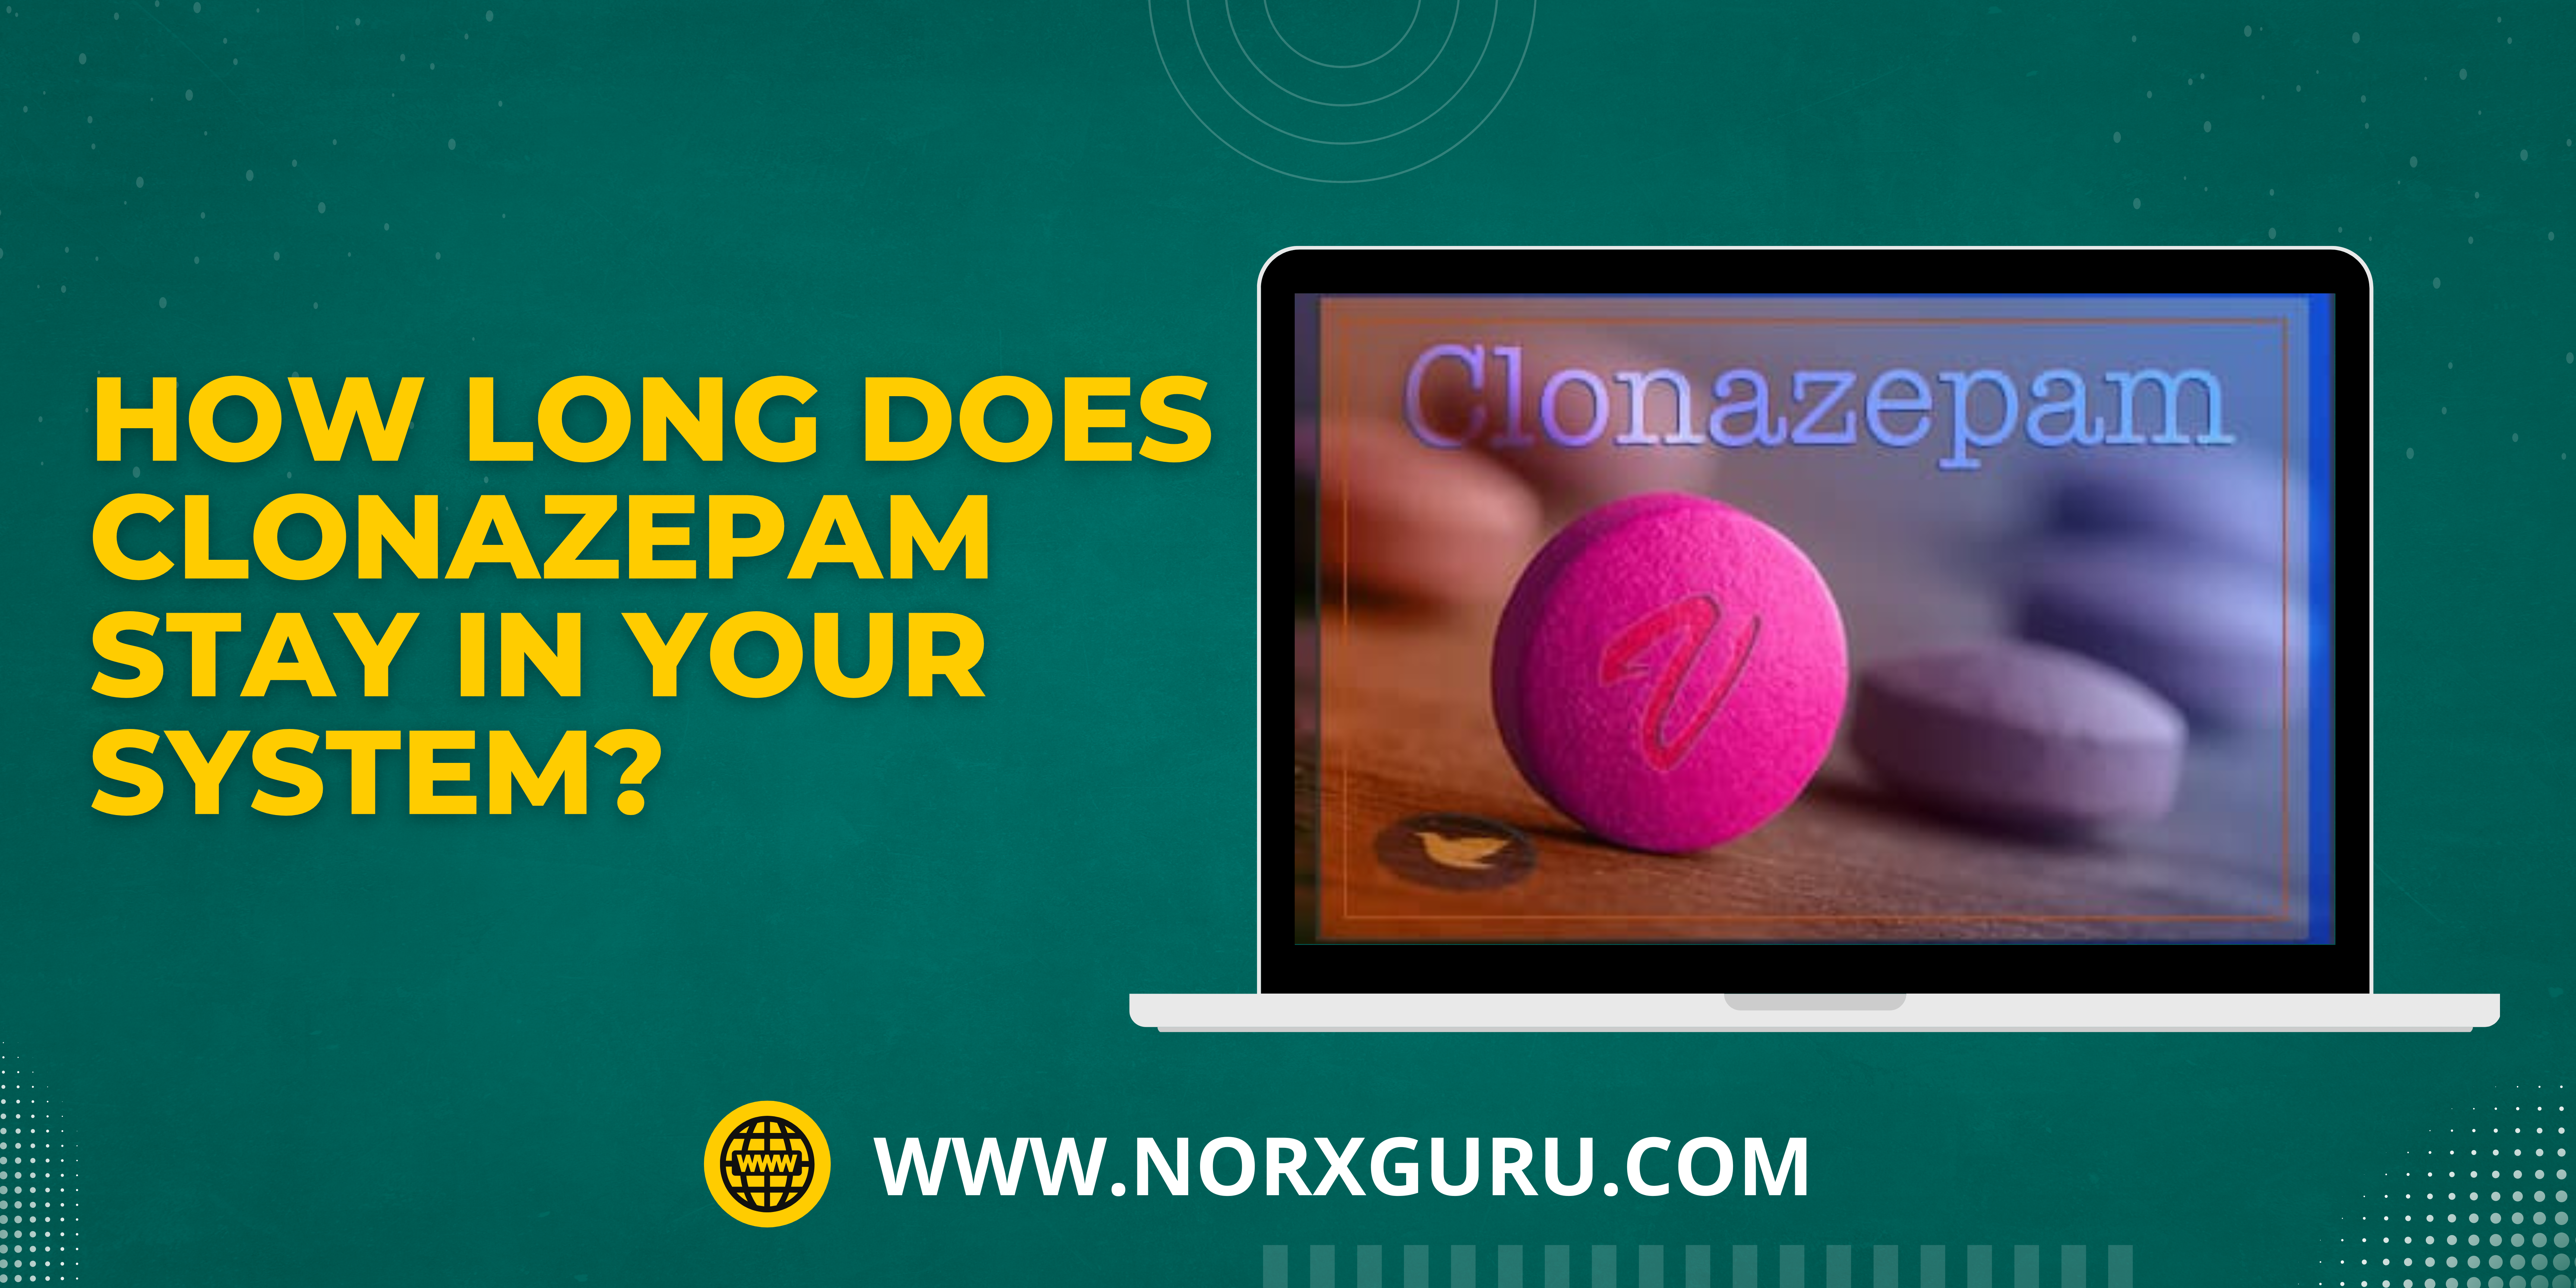 How long does Clonazepam stay in your system?